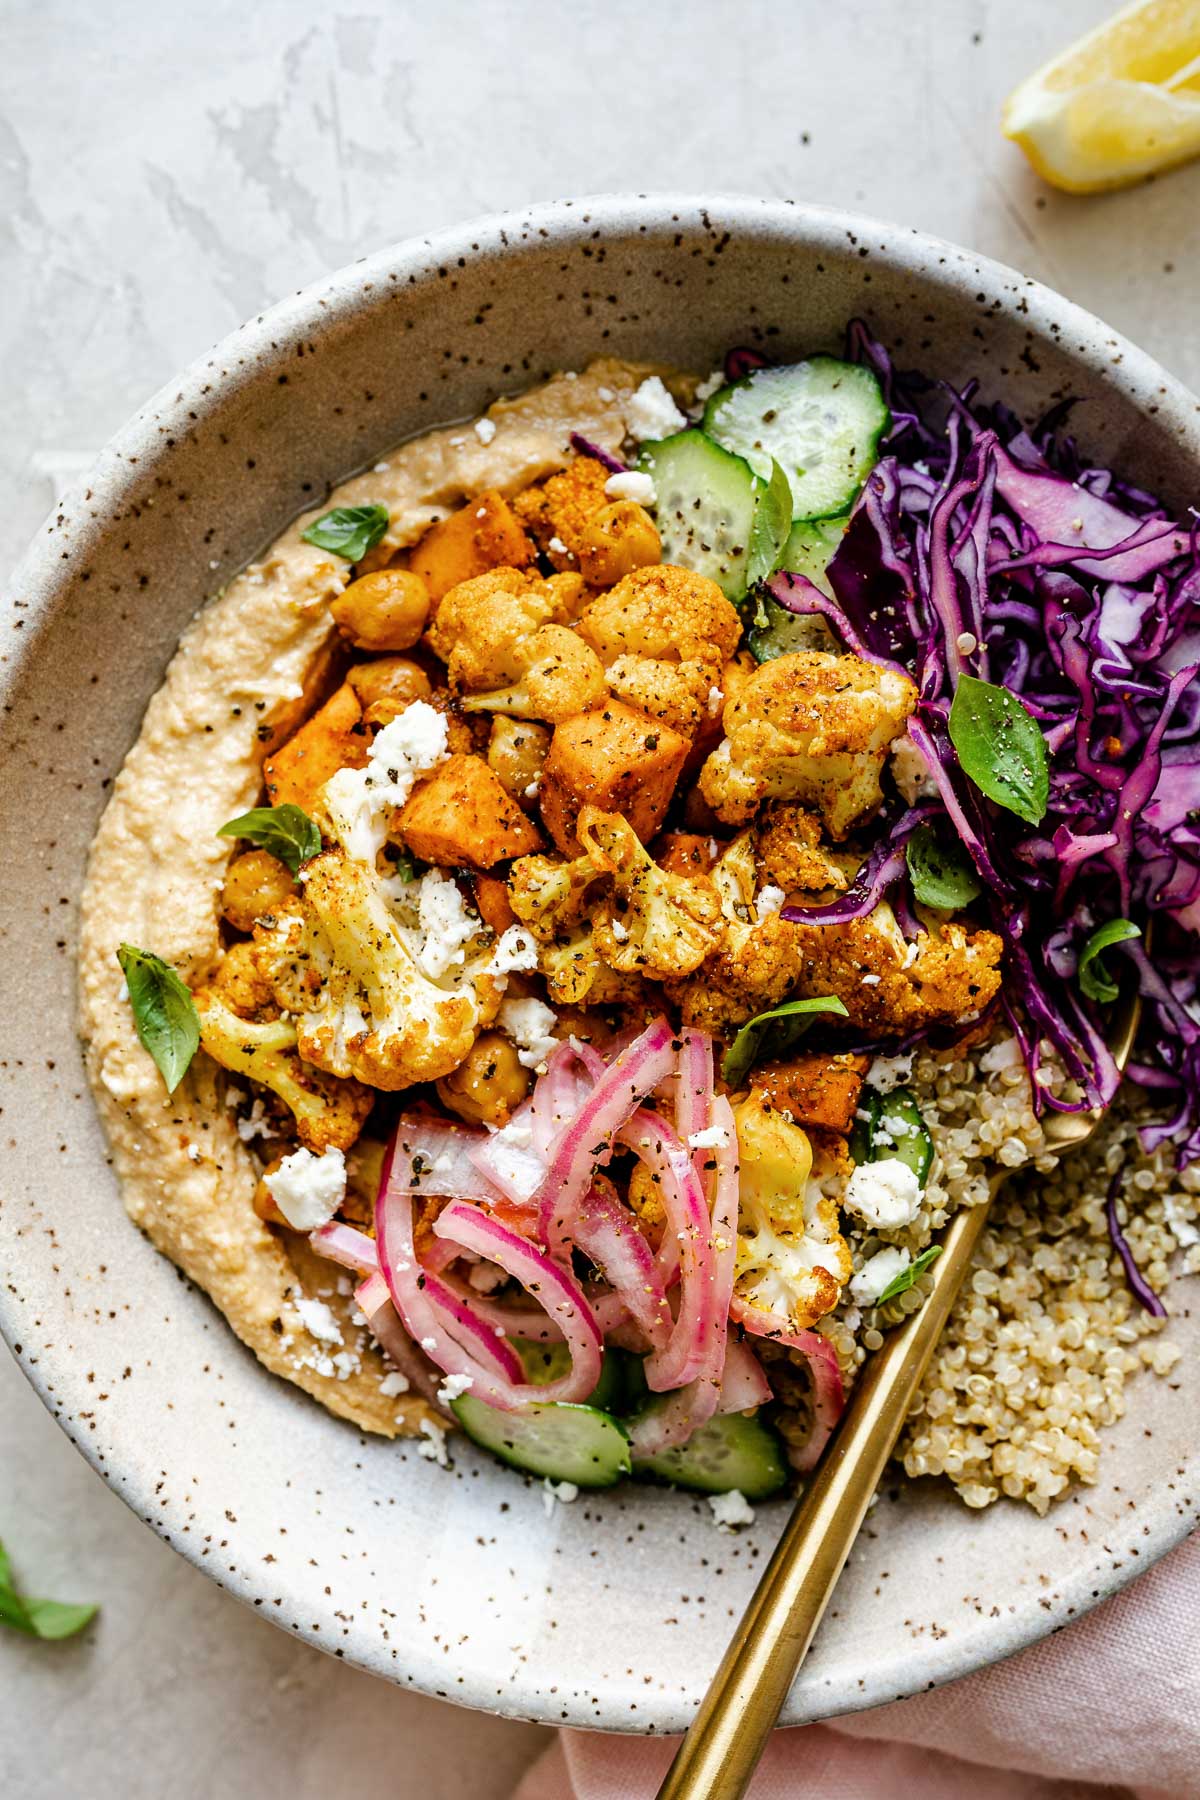 Vegan shawarma hummus bowl, with roasted cauliflower & sweet potato shawarma, thinly sliced cucumber, pickled red onions, red cabbage, & quinoa. The bowl sits atop a creamy cement surface next to lemon wedges & a pink linen napkin.